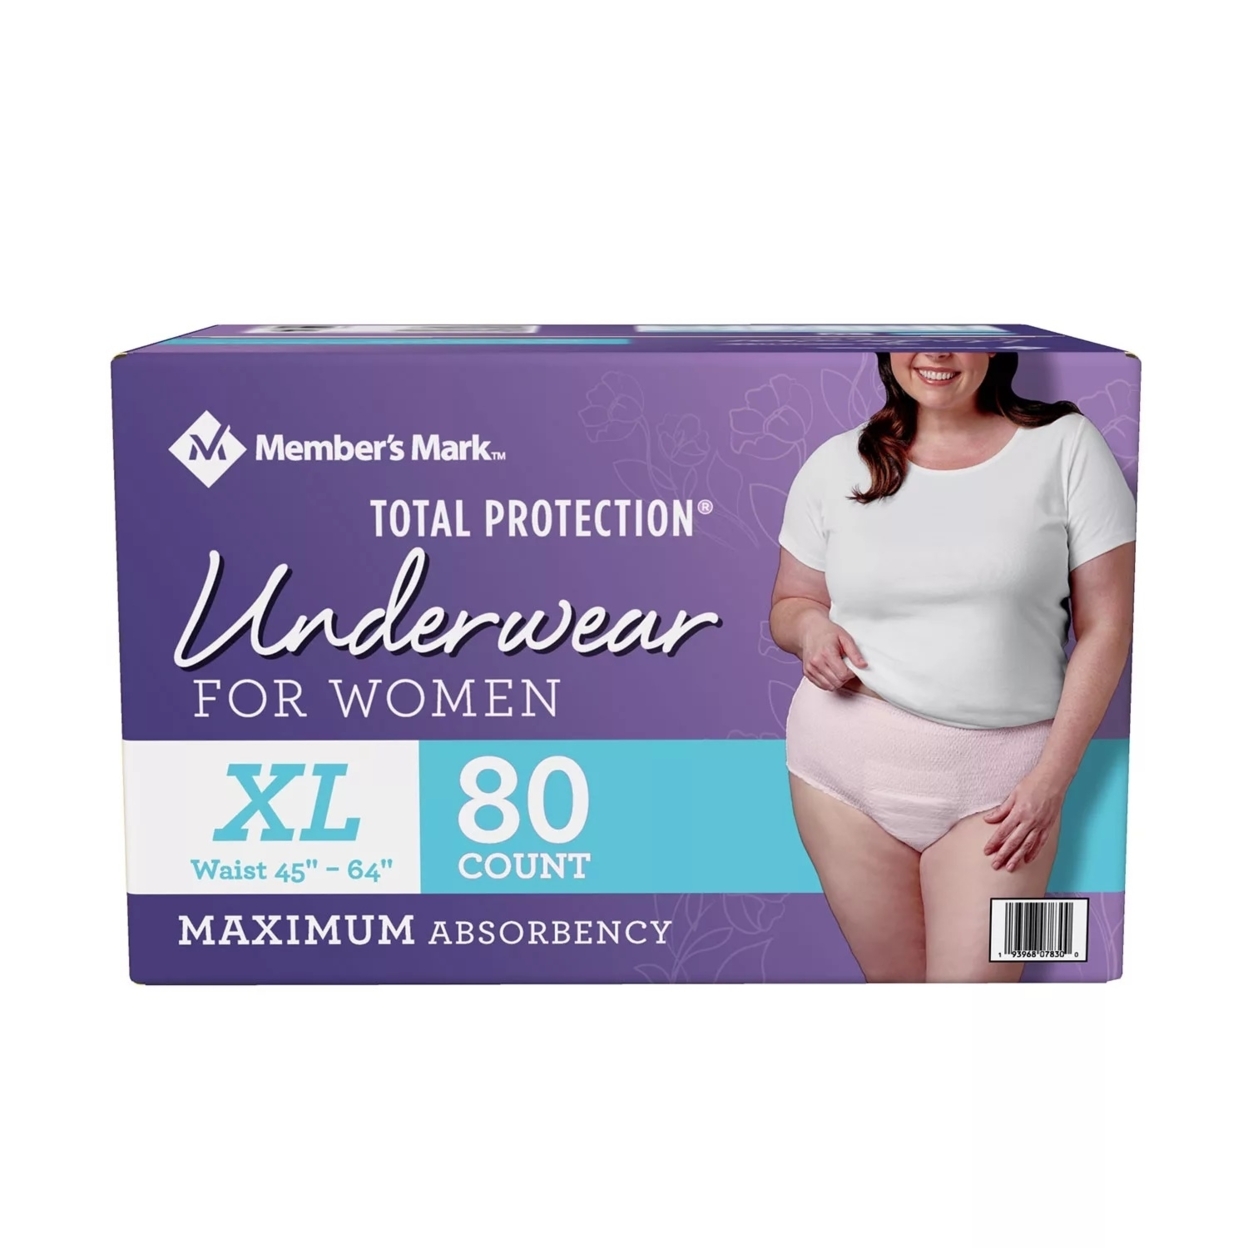 Member's Mark Total Protection Underwear For Women, Extra Large (80 Count)